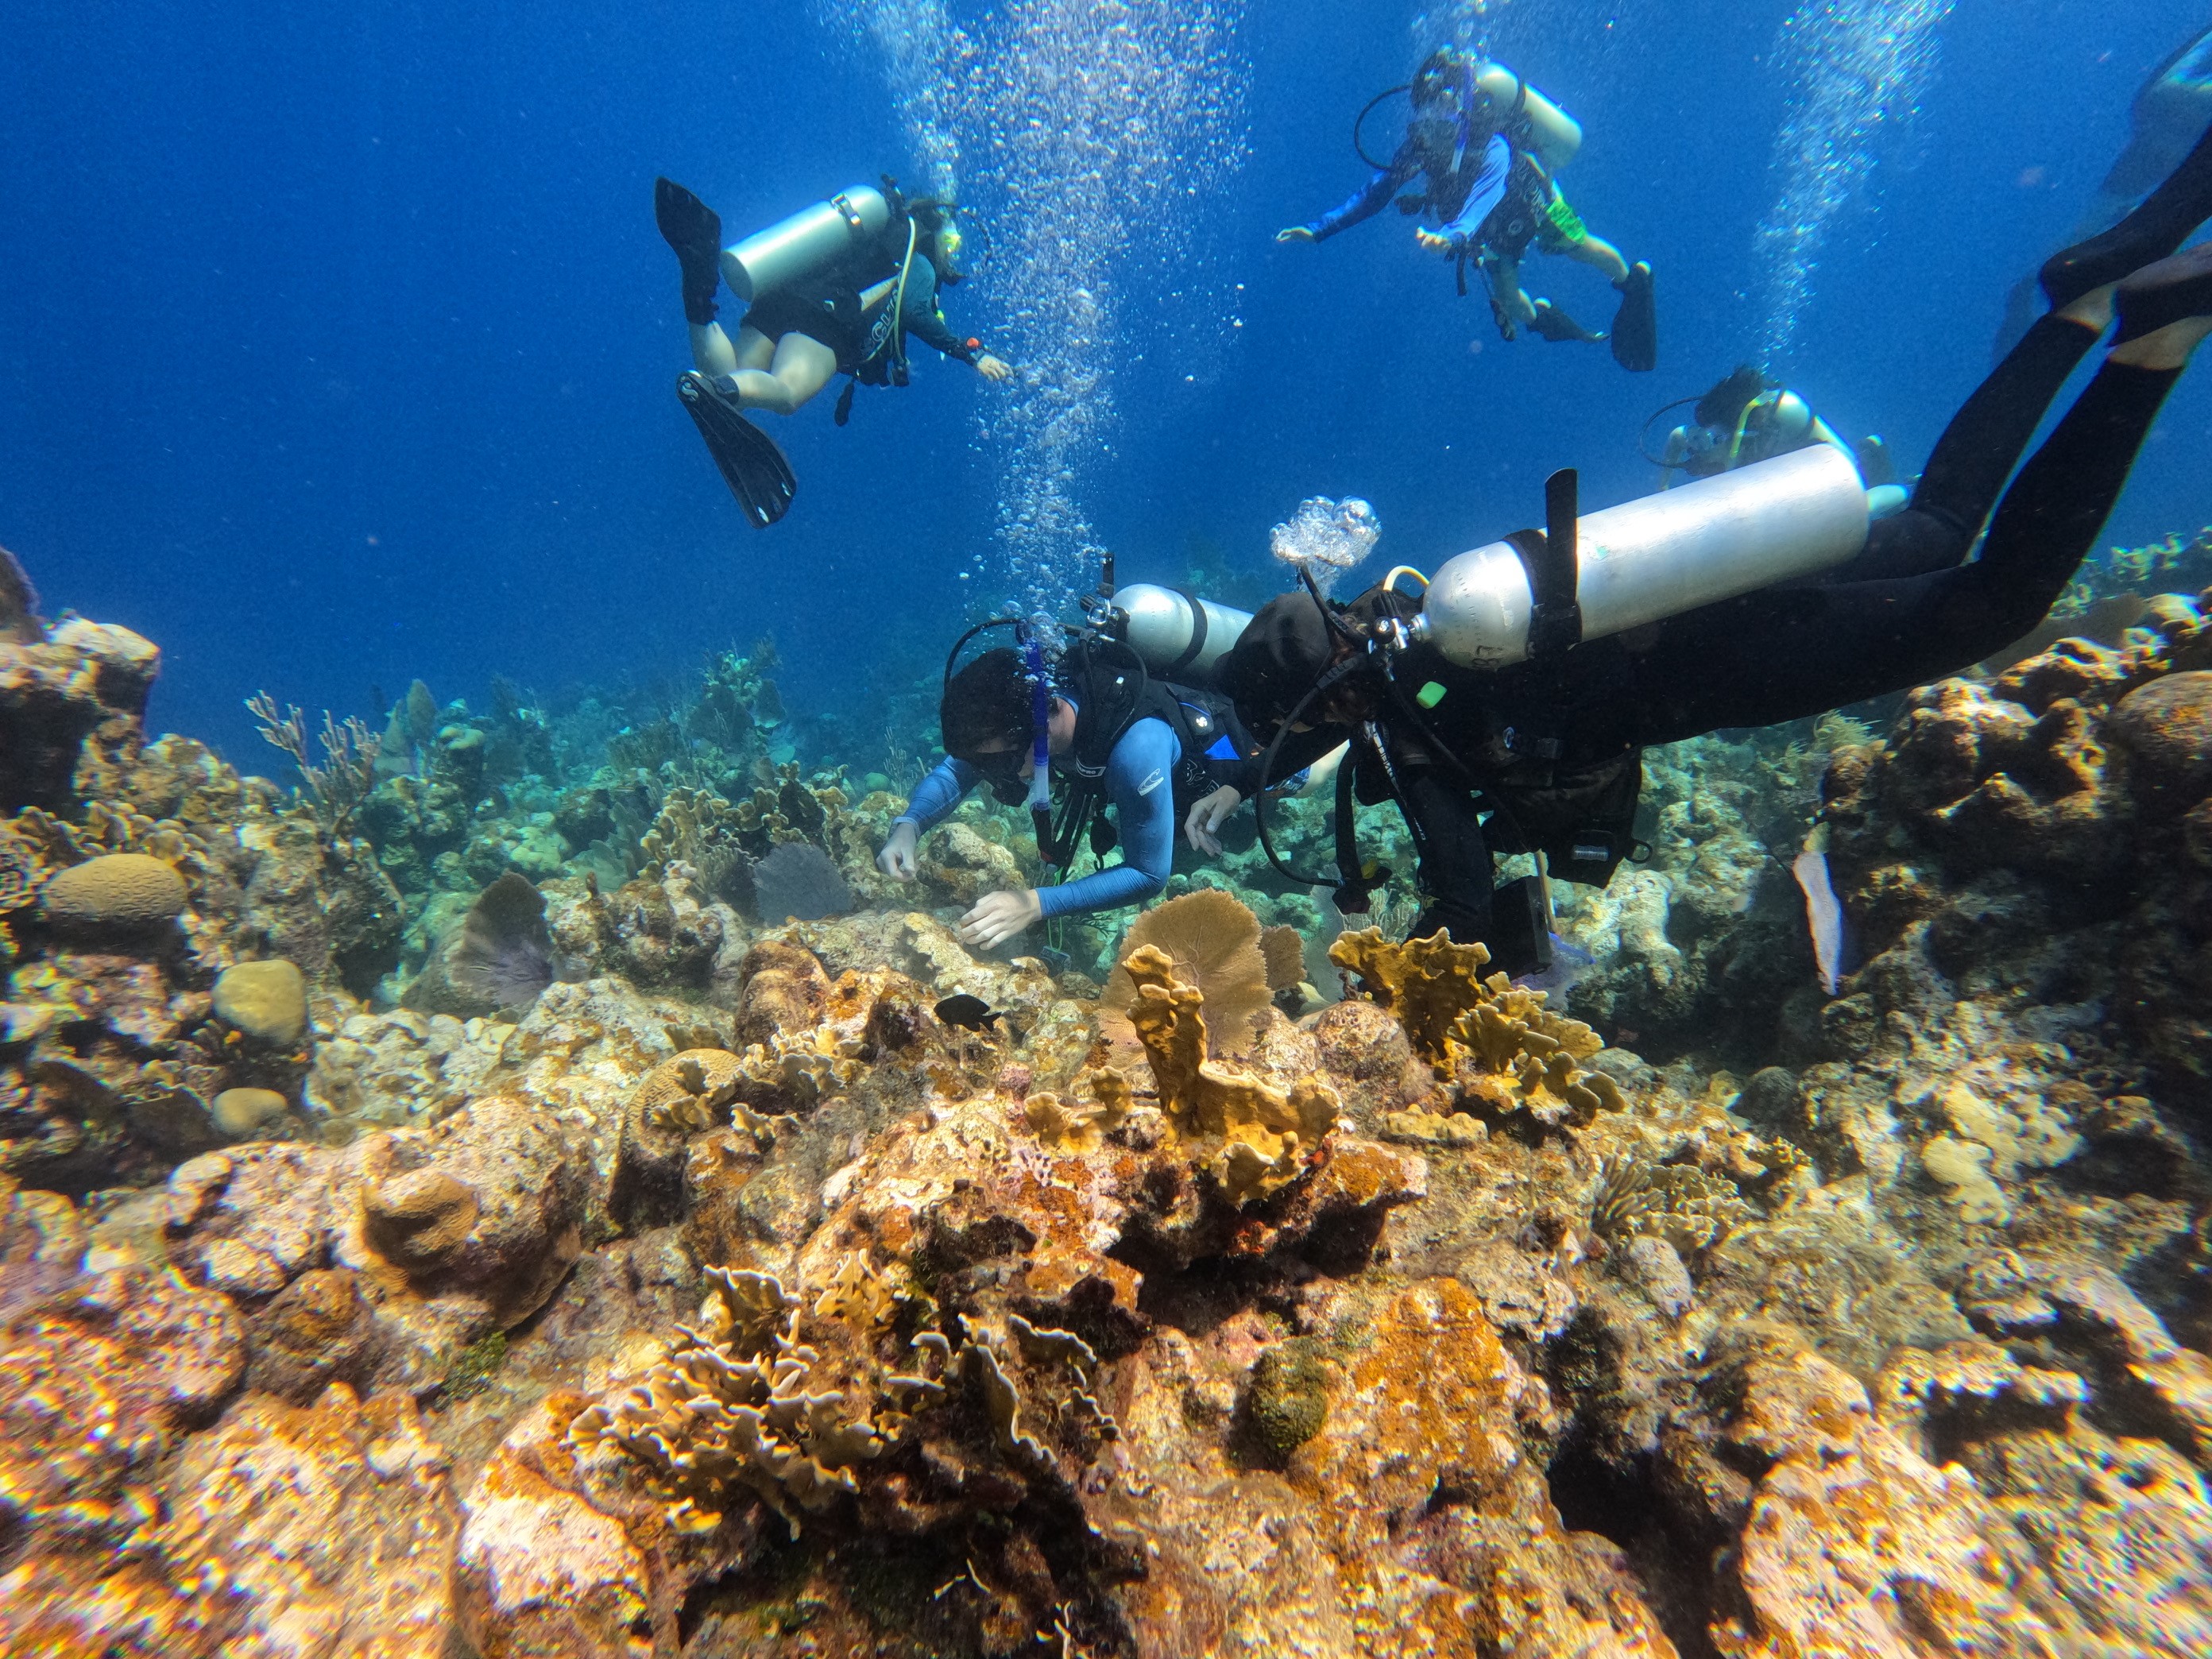 A Deeper Dive: Rising Temperatures and Research in Roatan